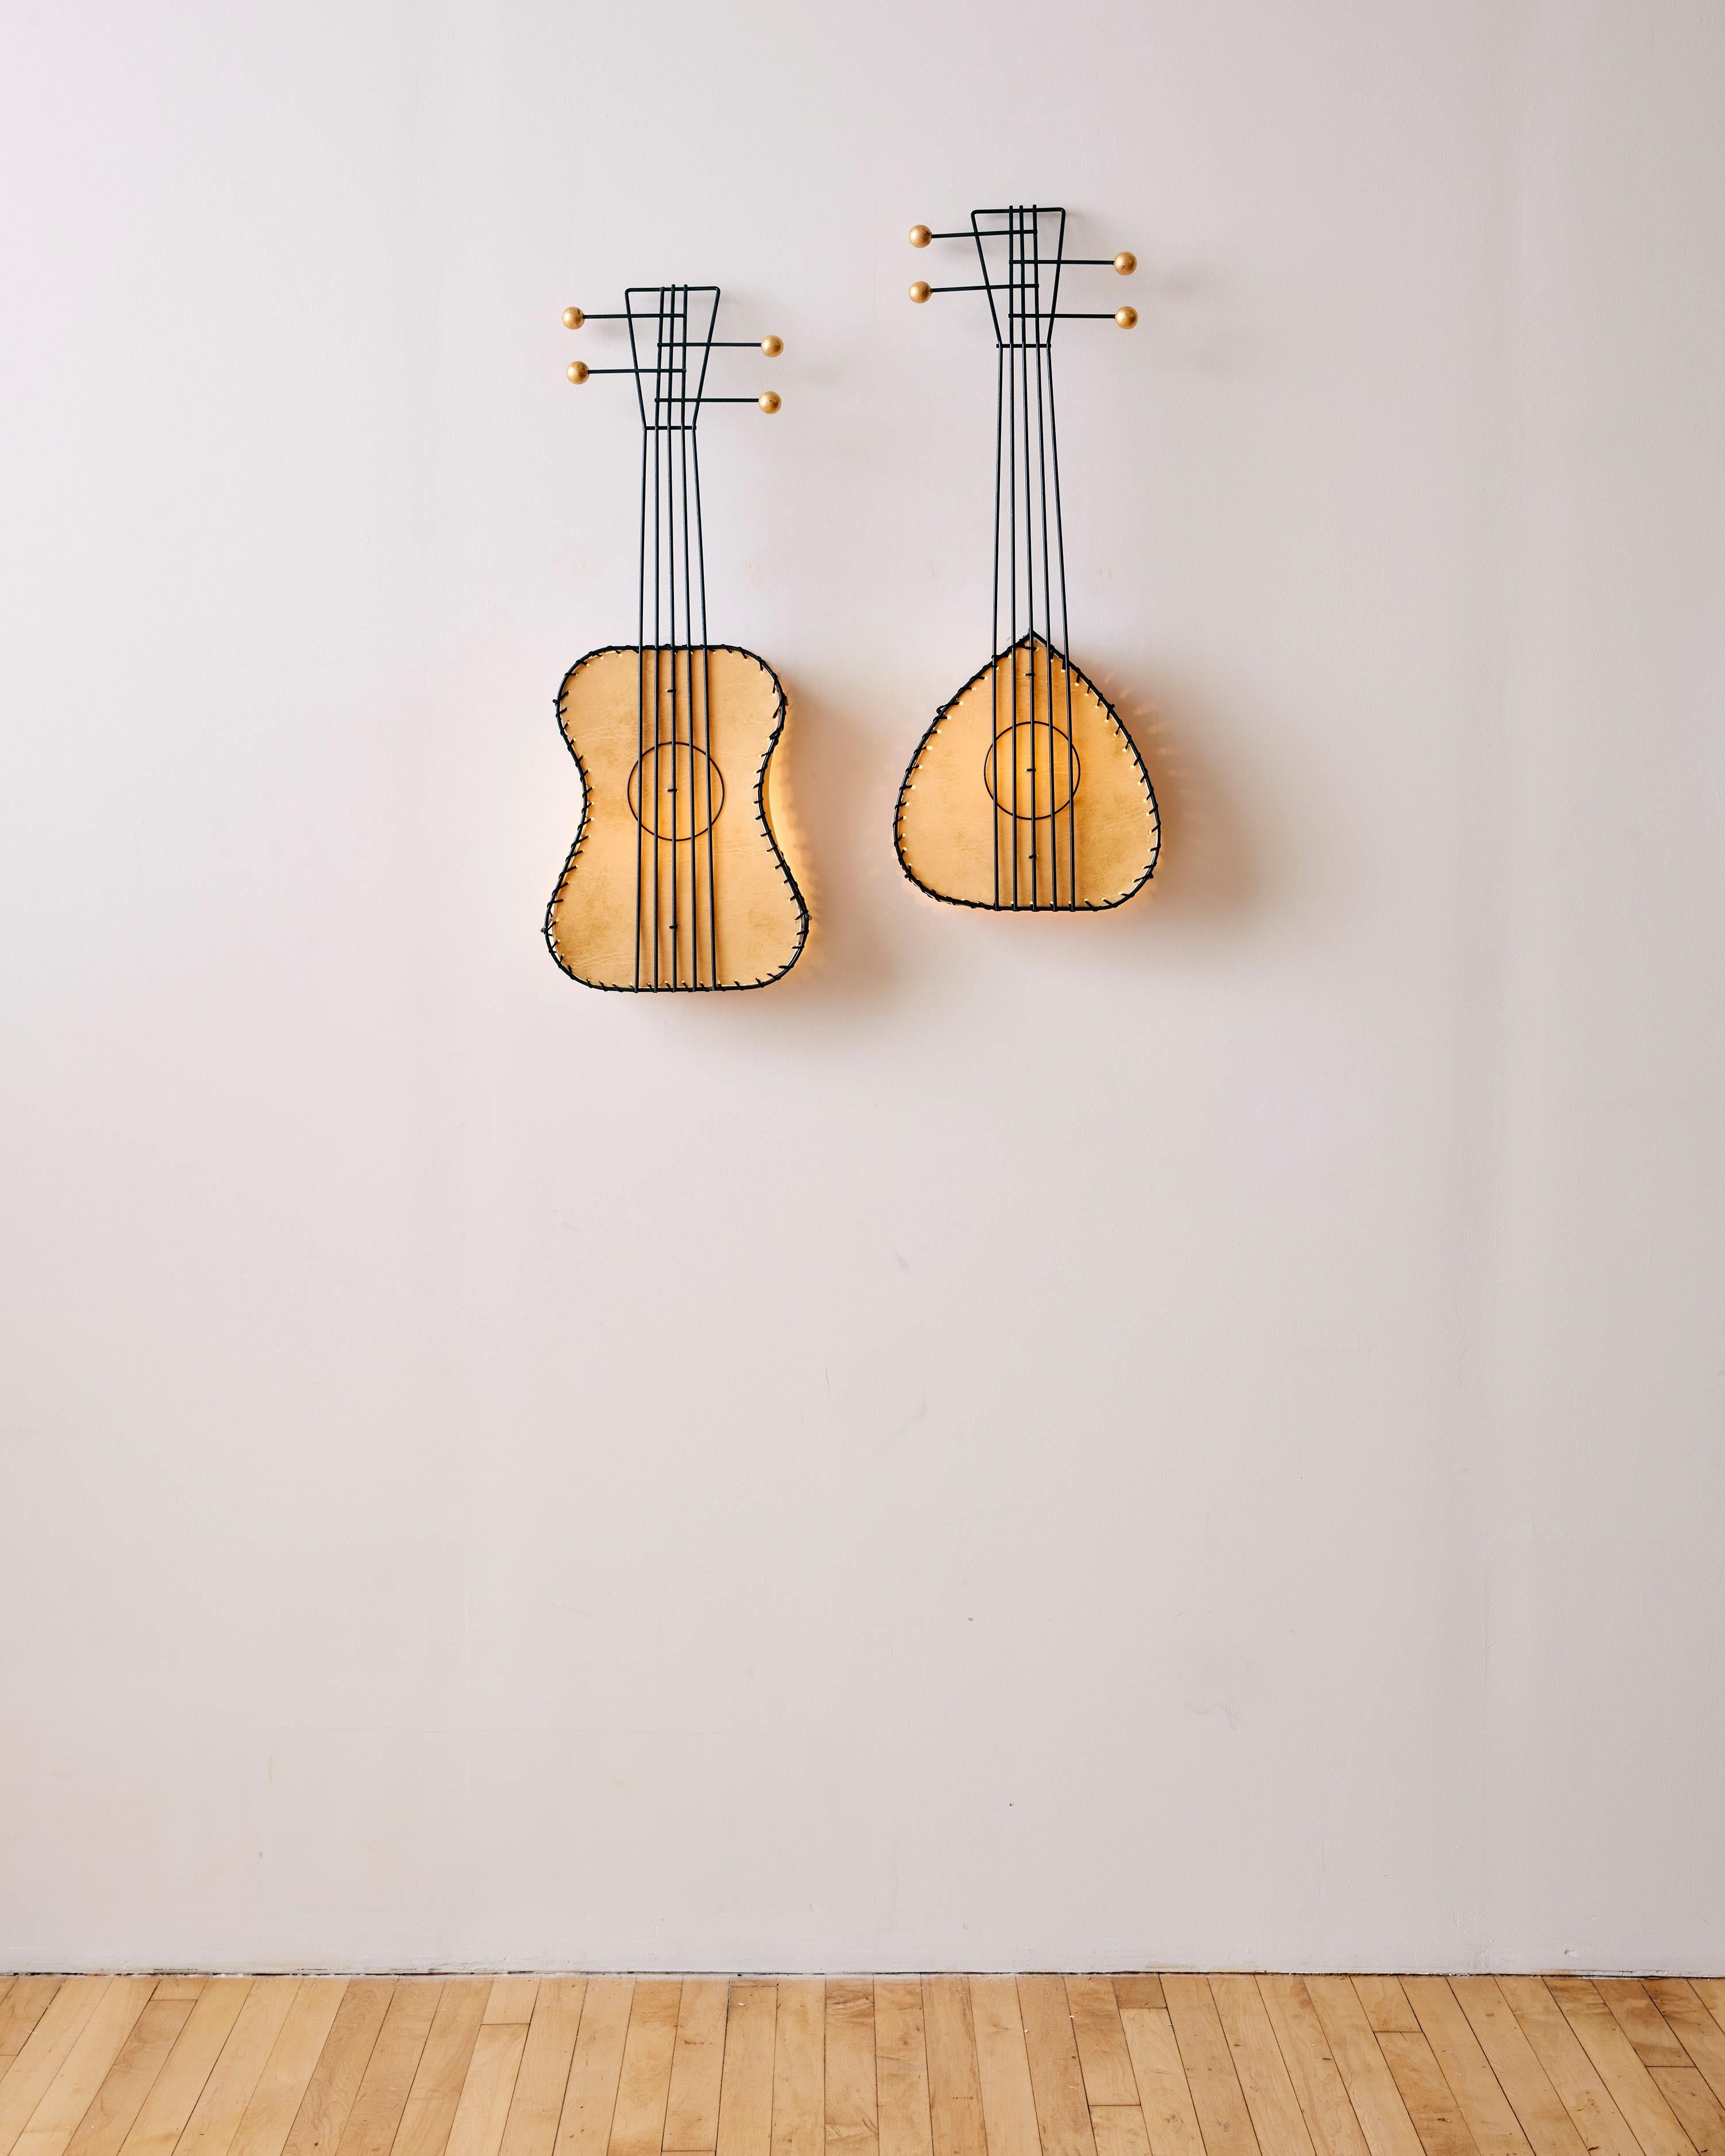 A Pair of Musical Instrument Wall Lamps by Frederic Weinberg, shaped like a guitar and a lute, featuring vellum-lined parchment, enameled steel, and gold leaf over spherical wood detail. 

Dimensions: 30.5